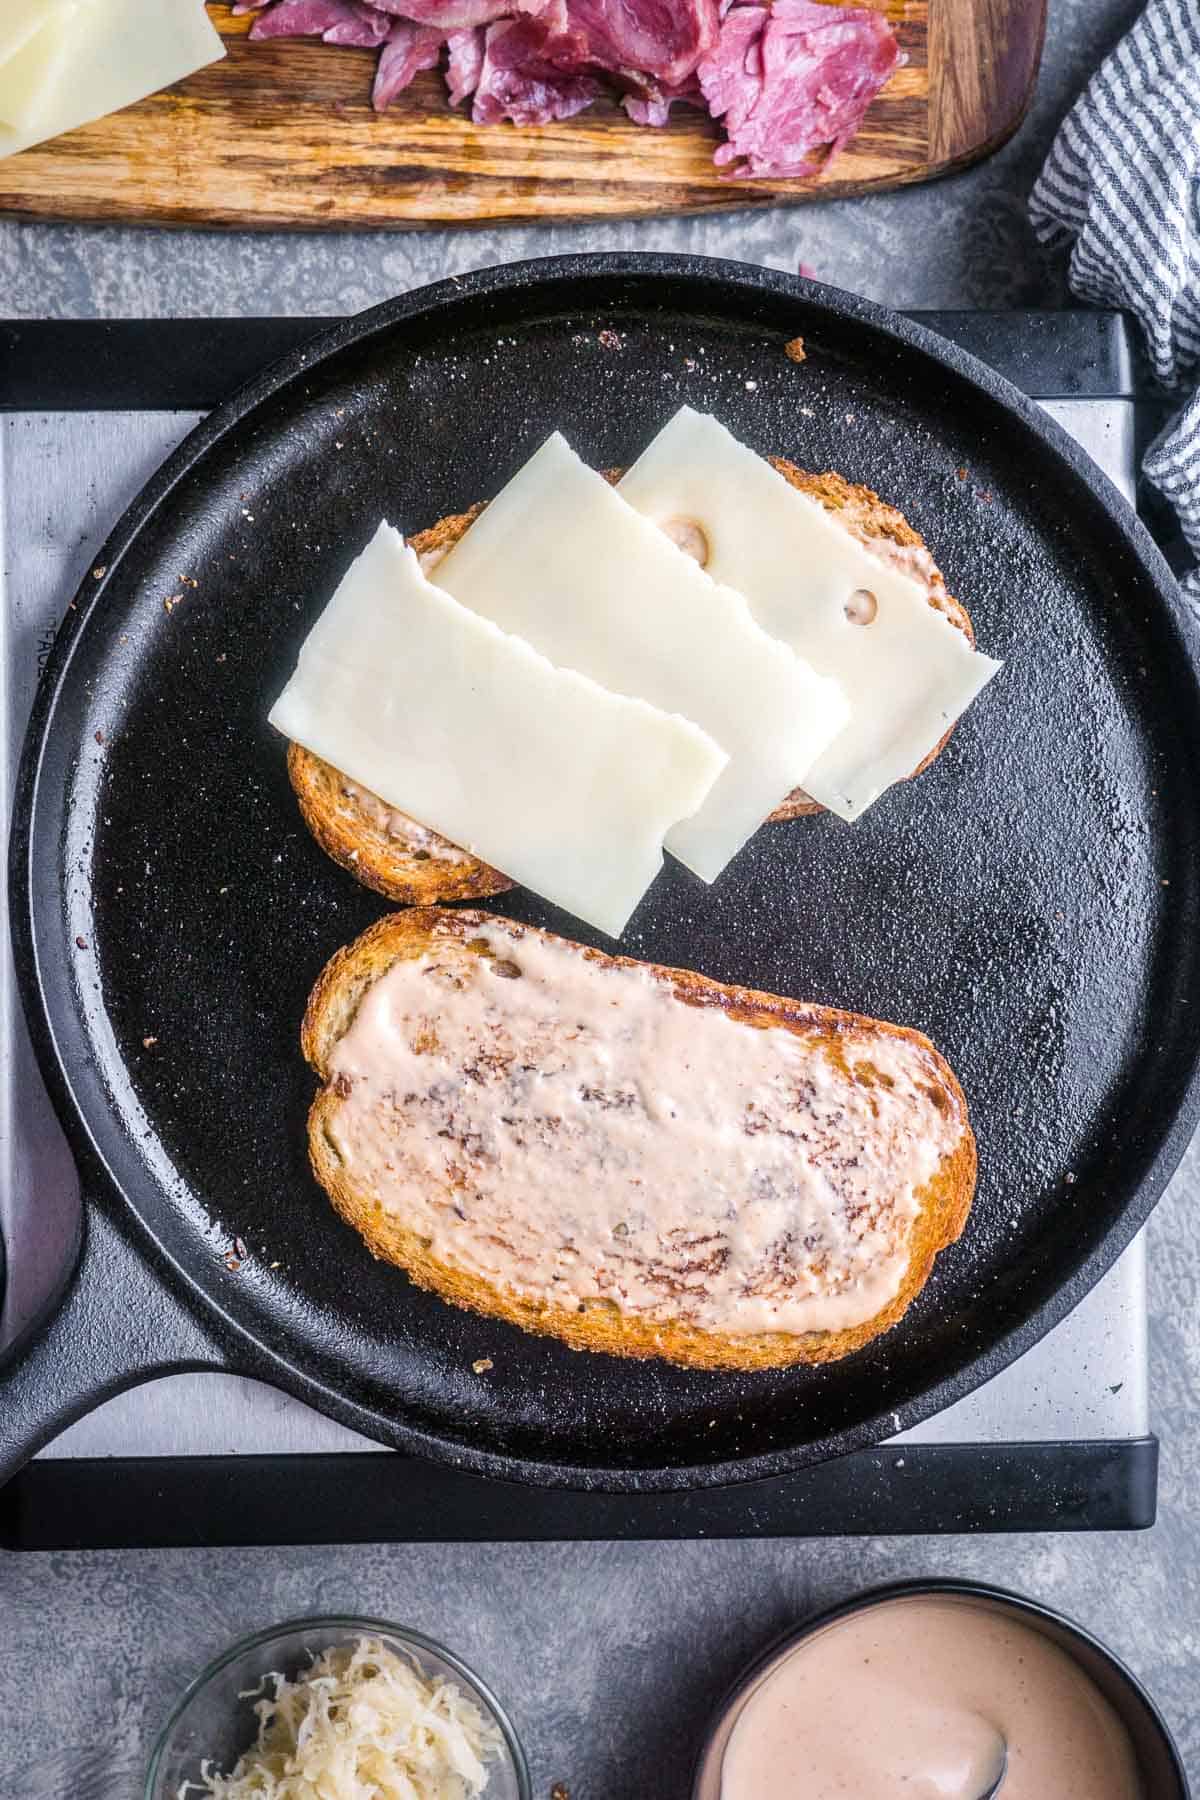 Two slices of rye in skillet; one topped with Russian dressing, the other topped with Swiss cheese